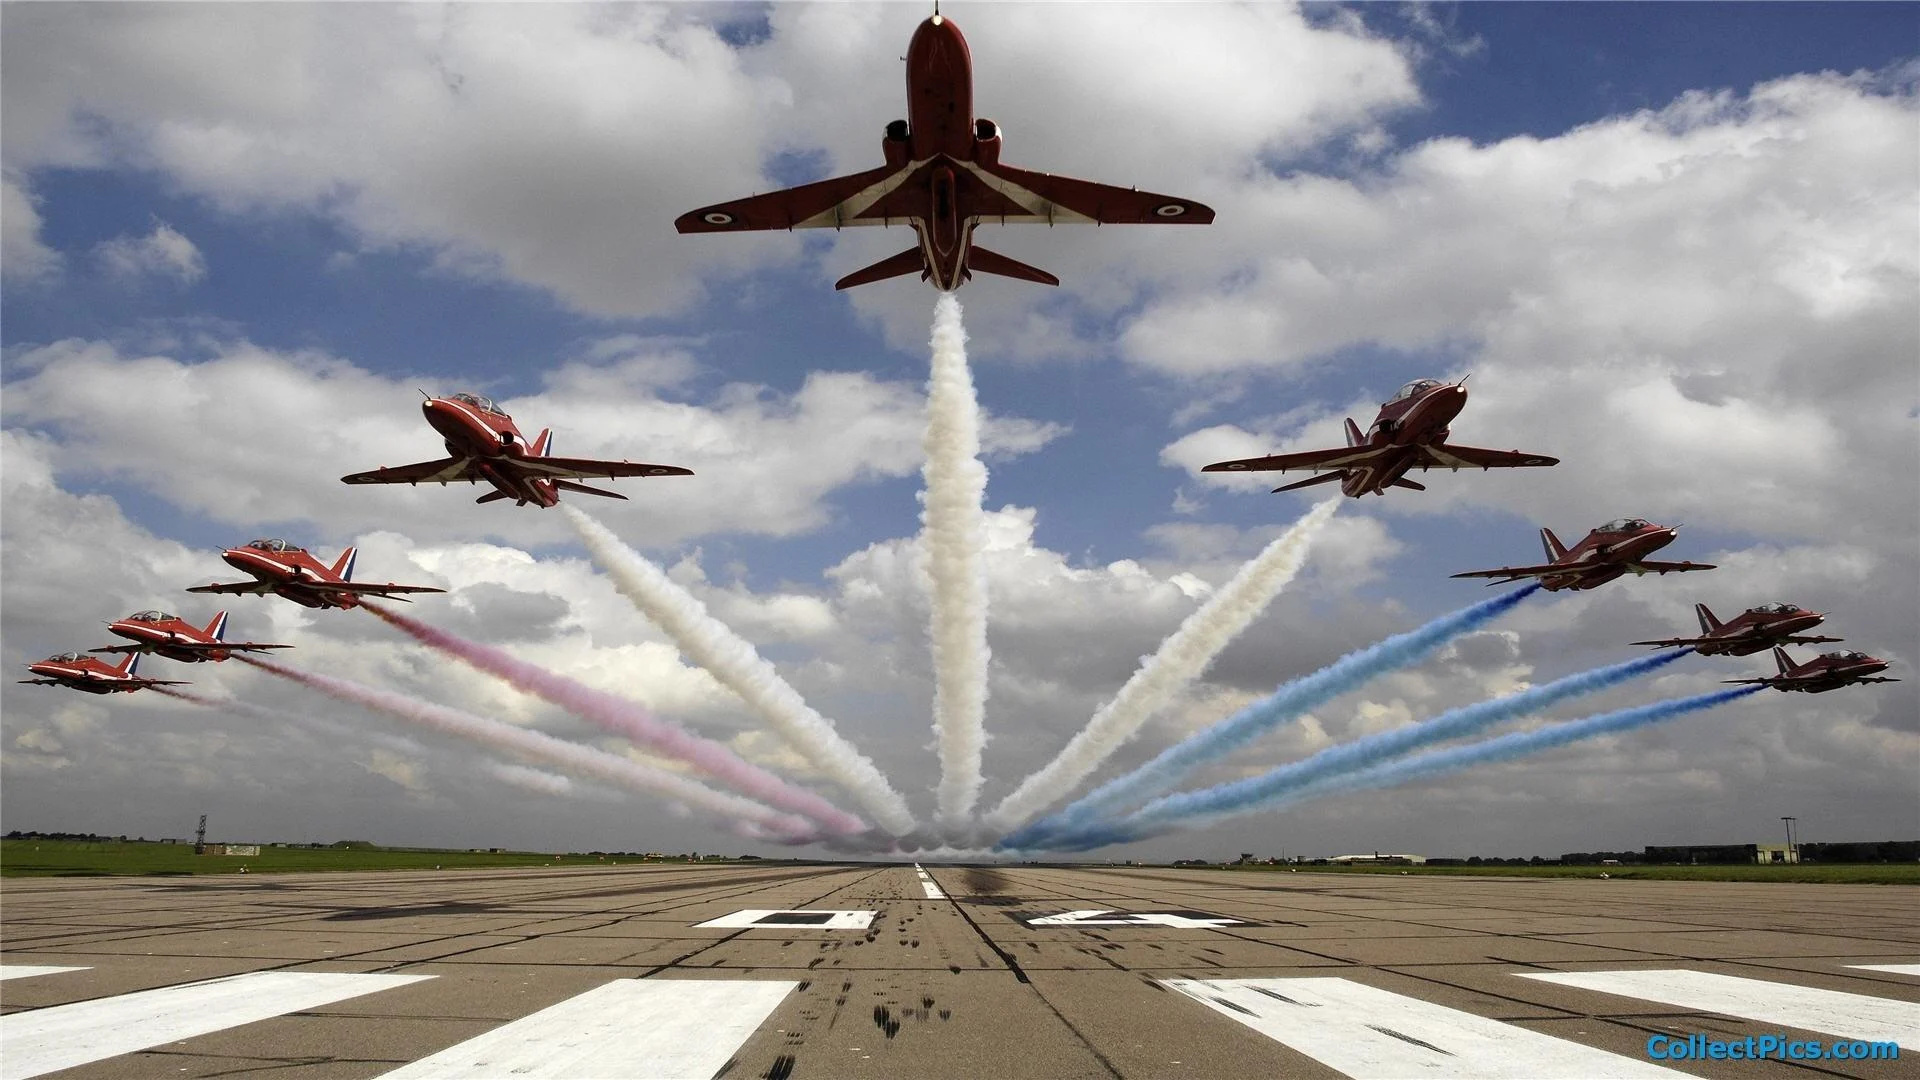 Aerobatics: The Red Arrows - the Royal Air Force Aerobatic Team, Drawing in the air. 1920x1080 Full HD Wallpaper.